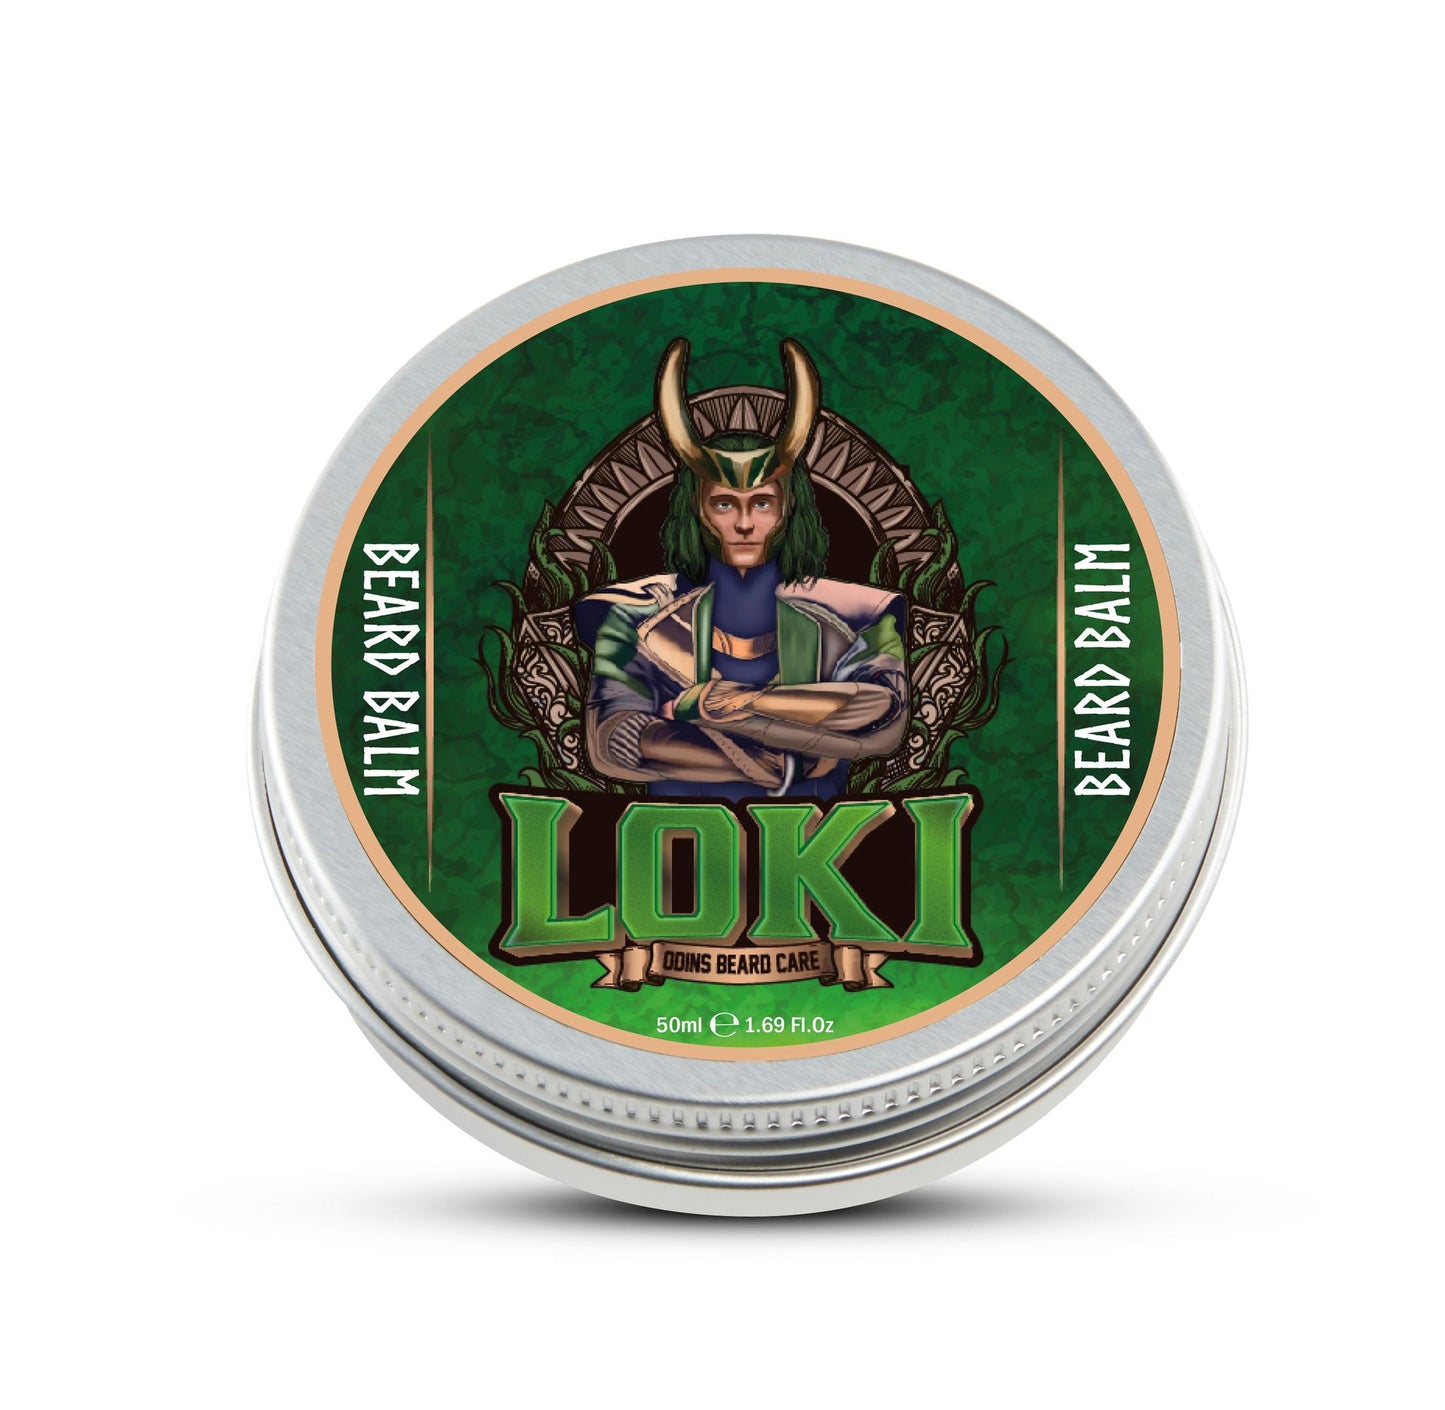 Loki - Oudh, Patchouli, Rock rose, Musk, Incense and Amber, Driftwood 50 ml